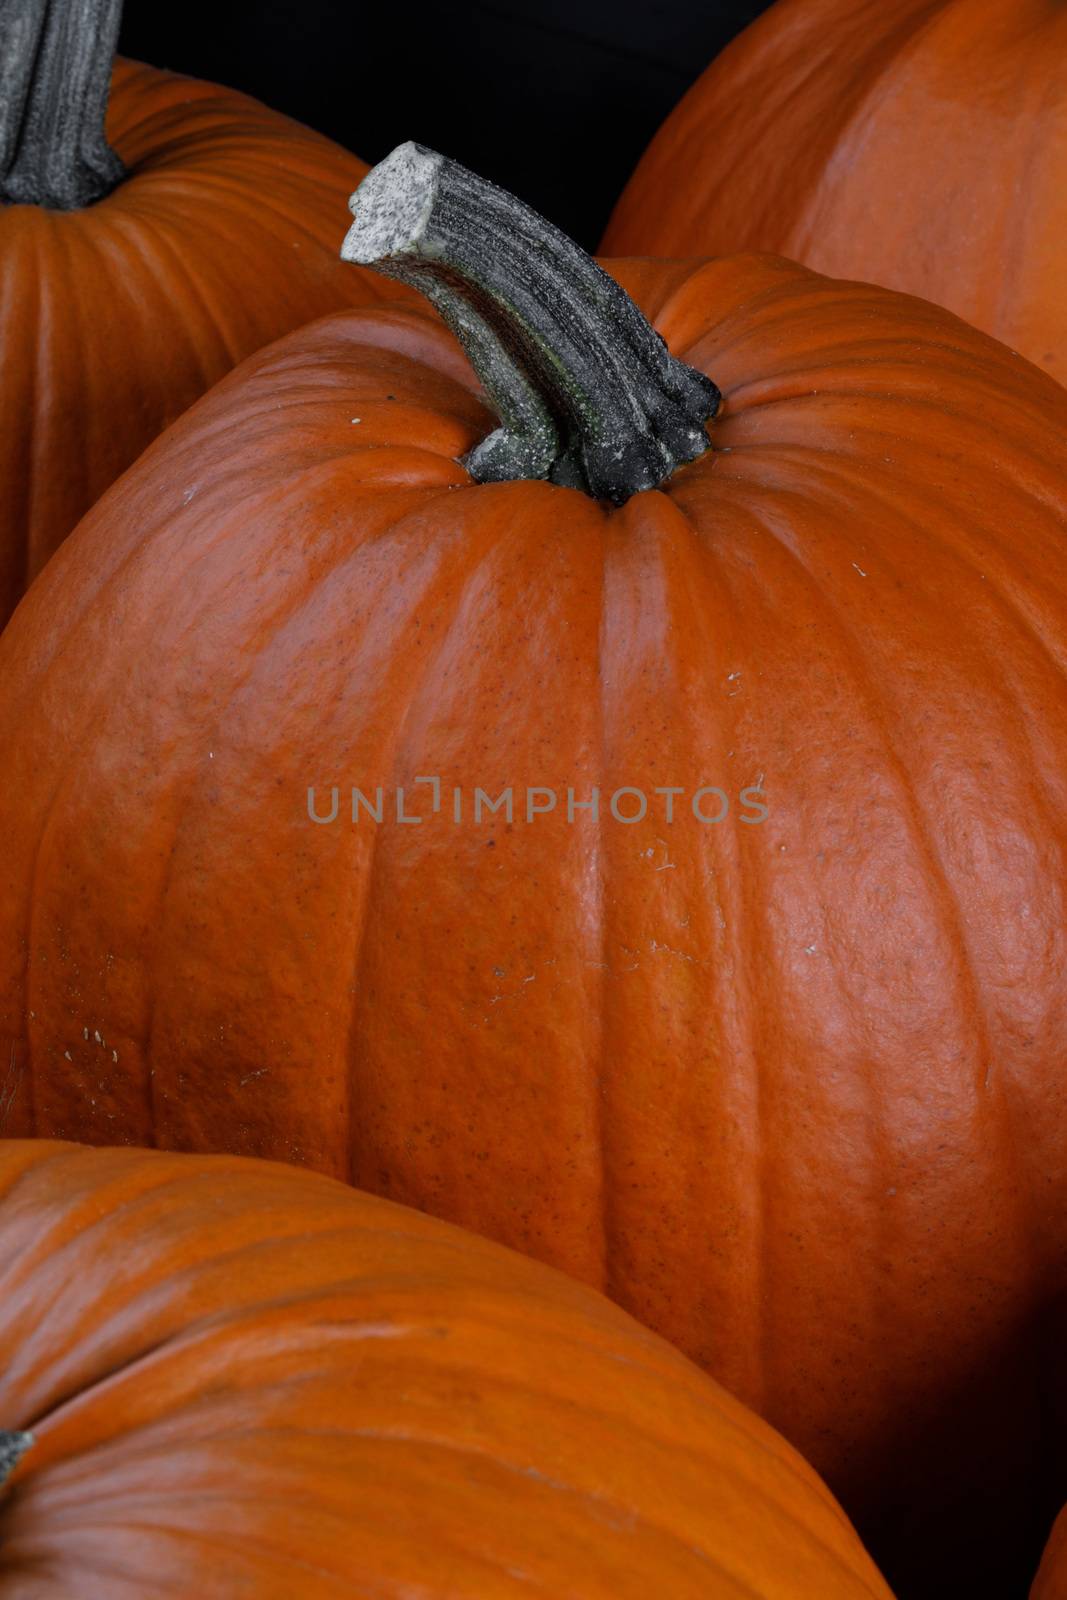 Many pumpkins collection by Yellowj